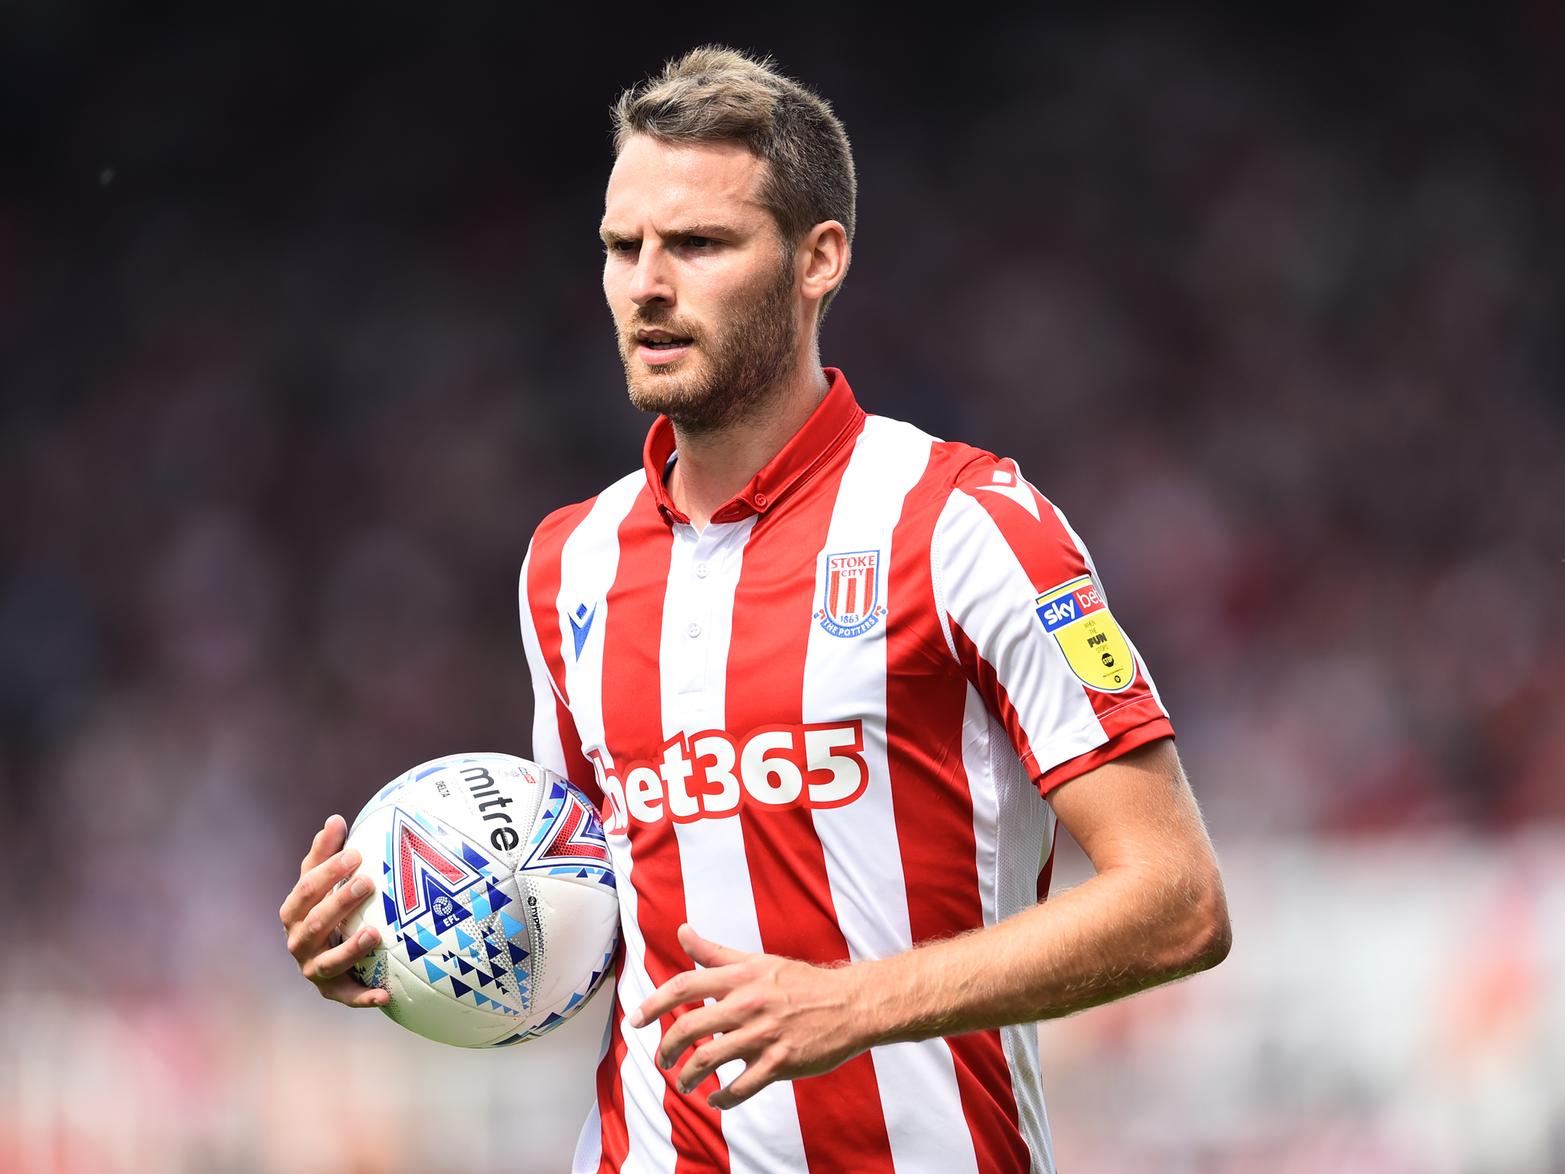 Stoke City boss Nathan Jones has confirmed that midfielder Nick Powell has suffered a further setback, picking up a fresh injury during recovery from an initial lengthy layoff.